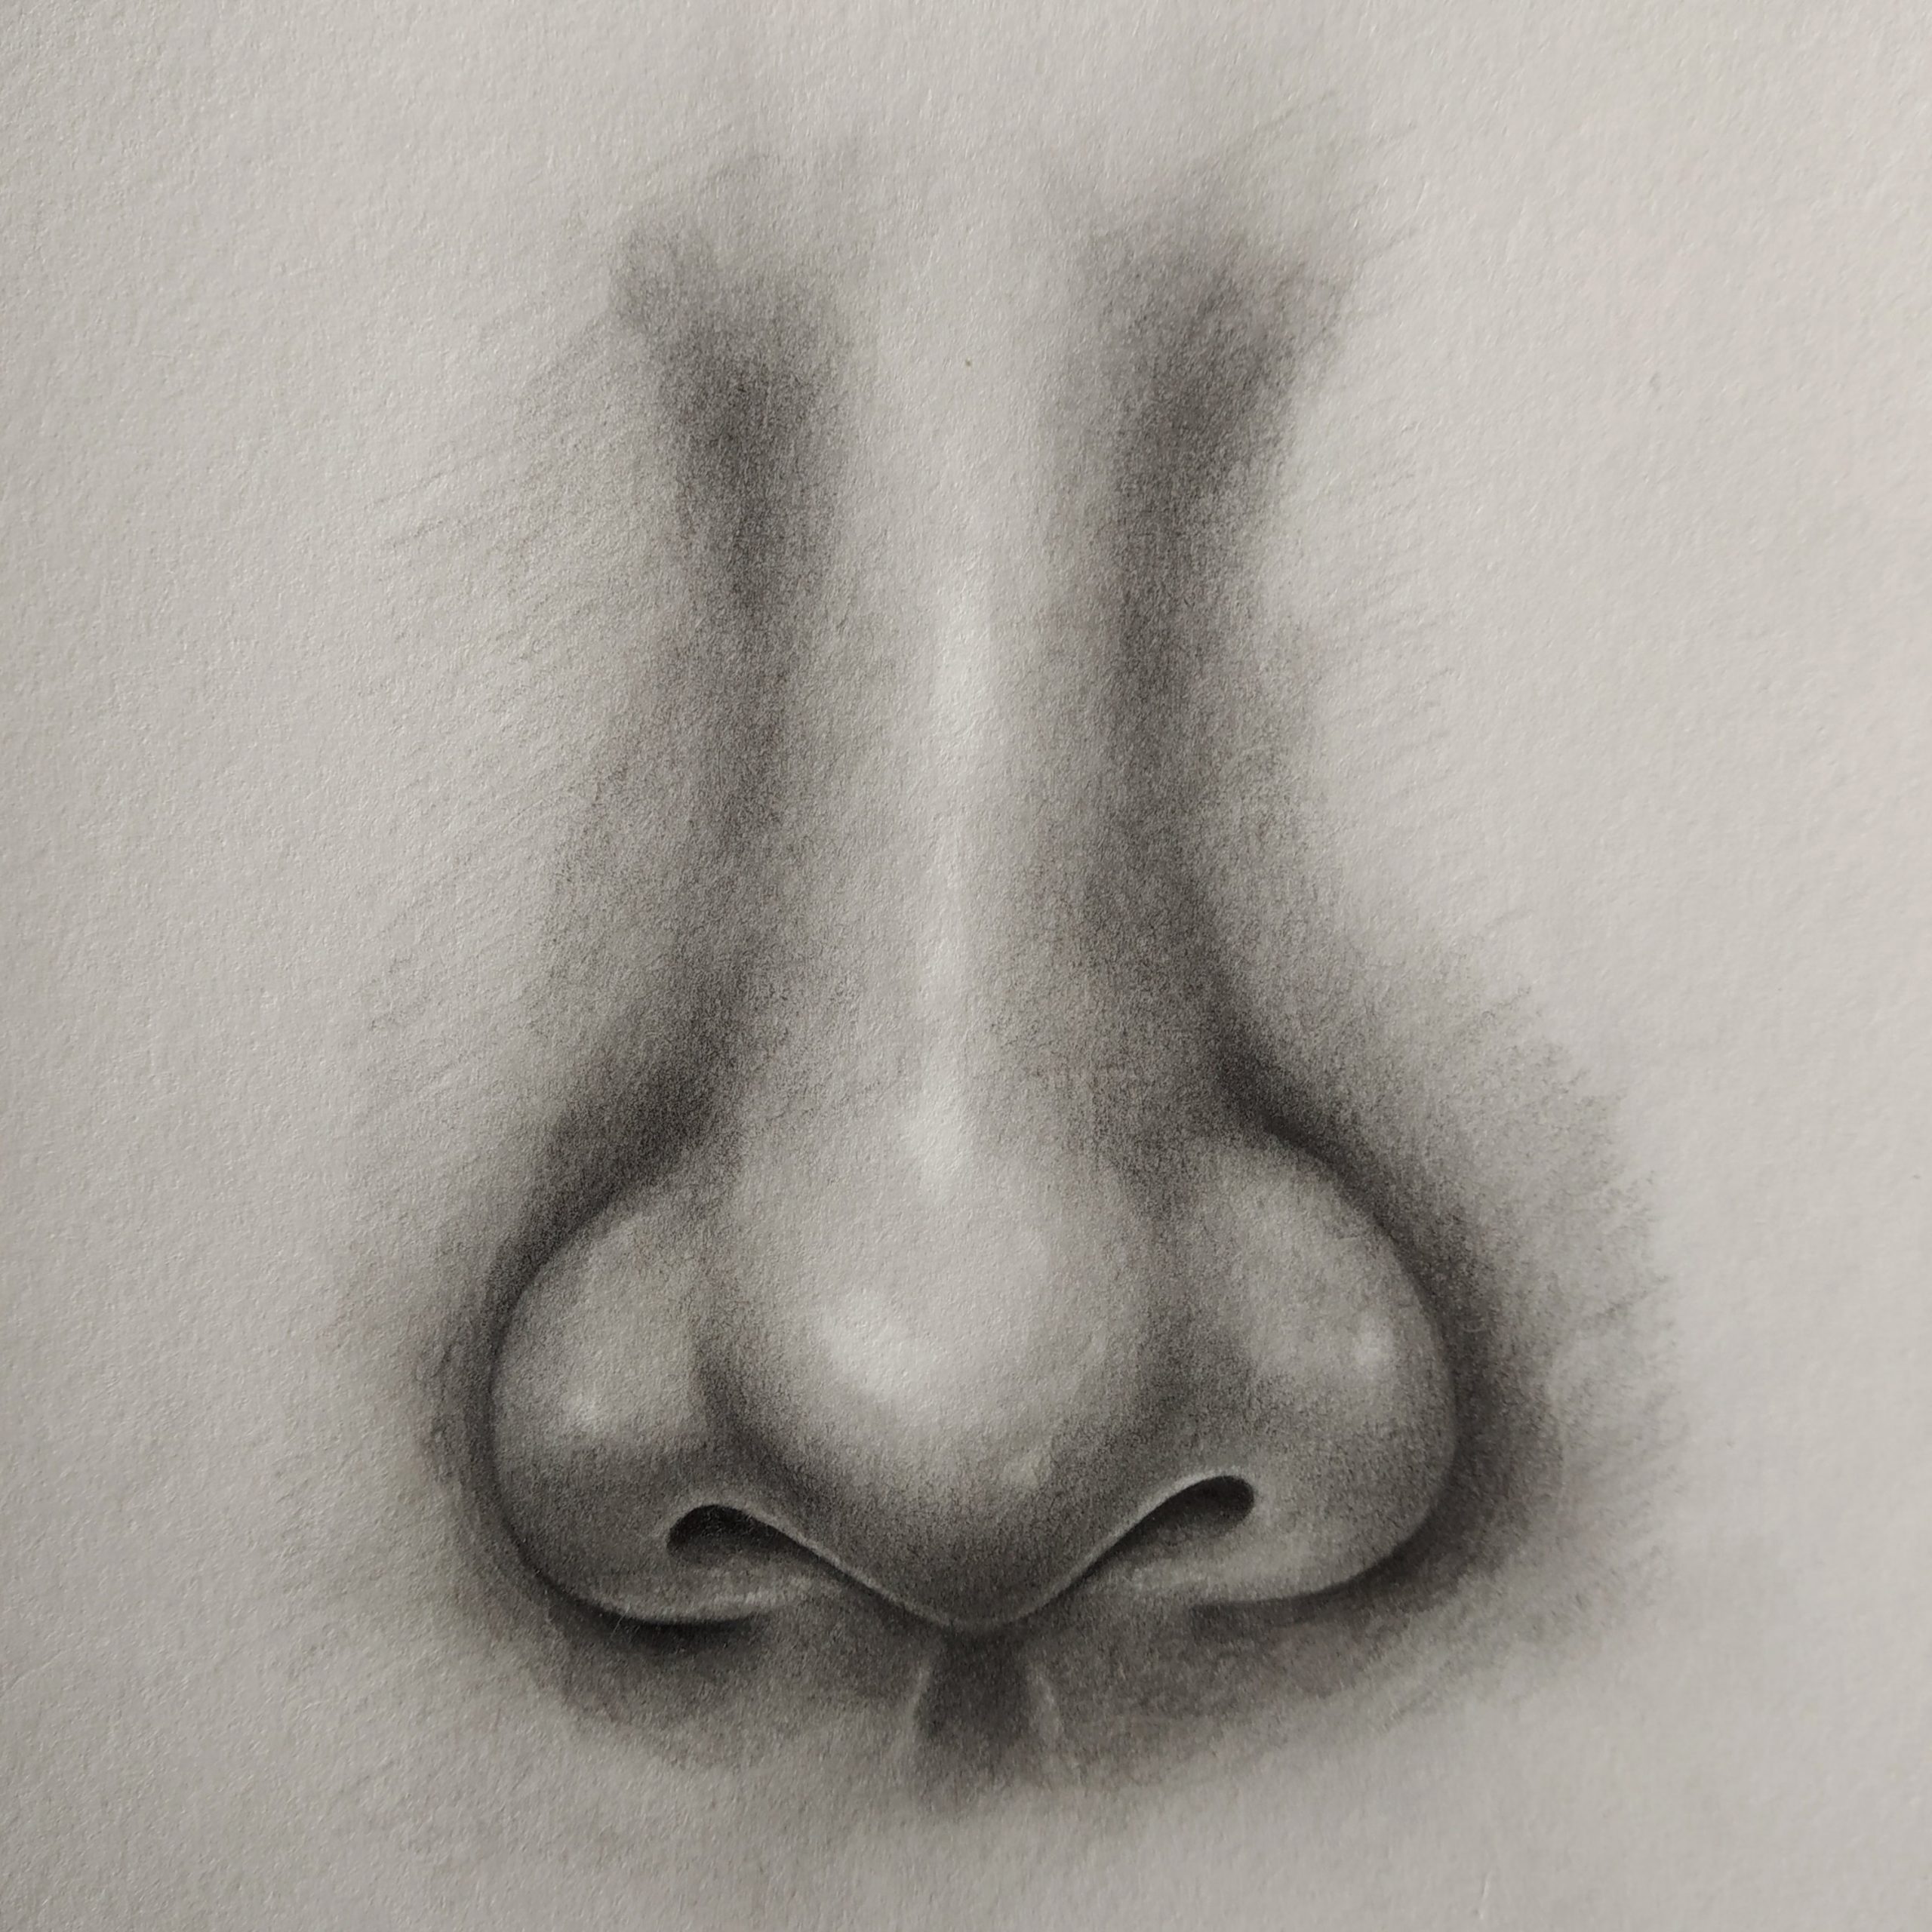 How To Draw A Realistic Nose With Pen